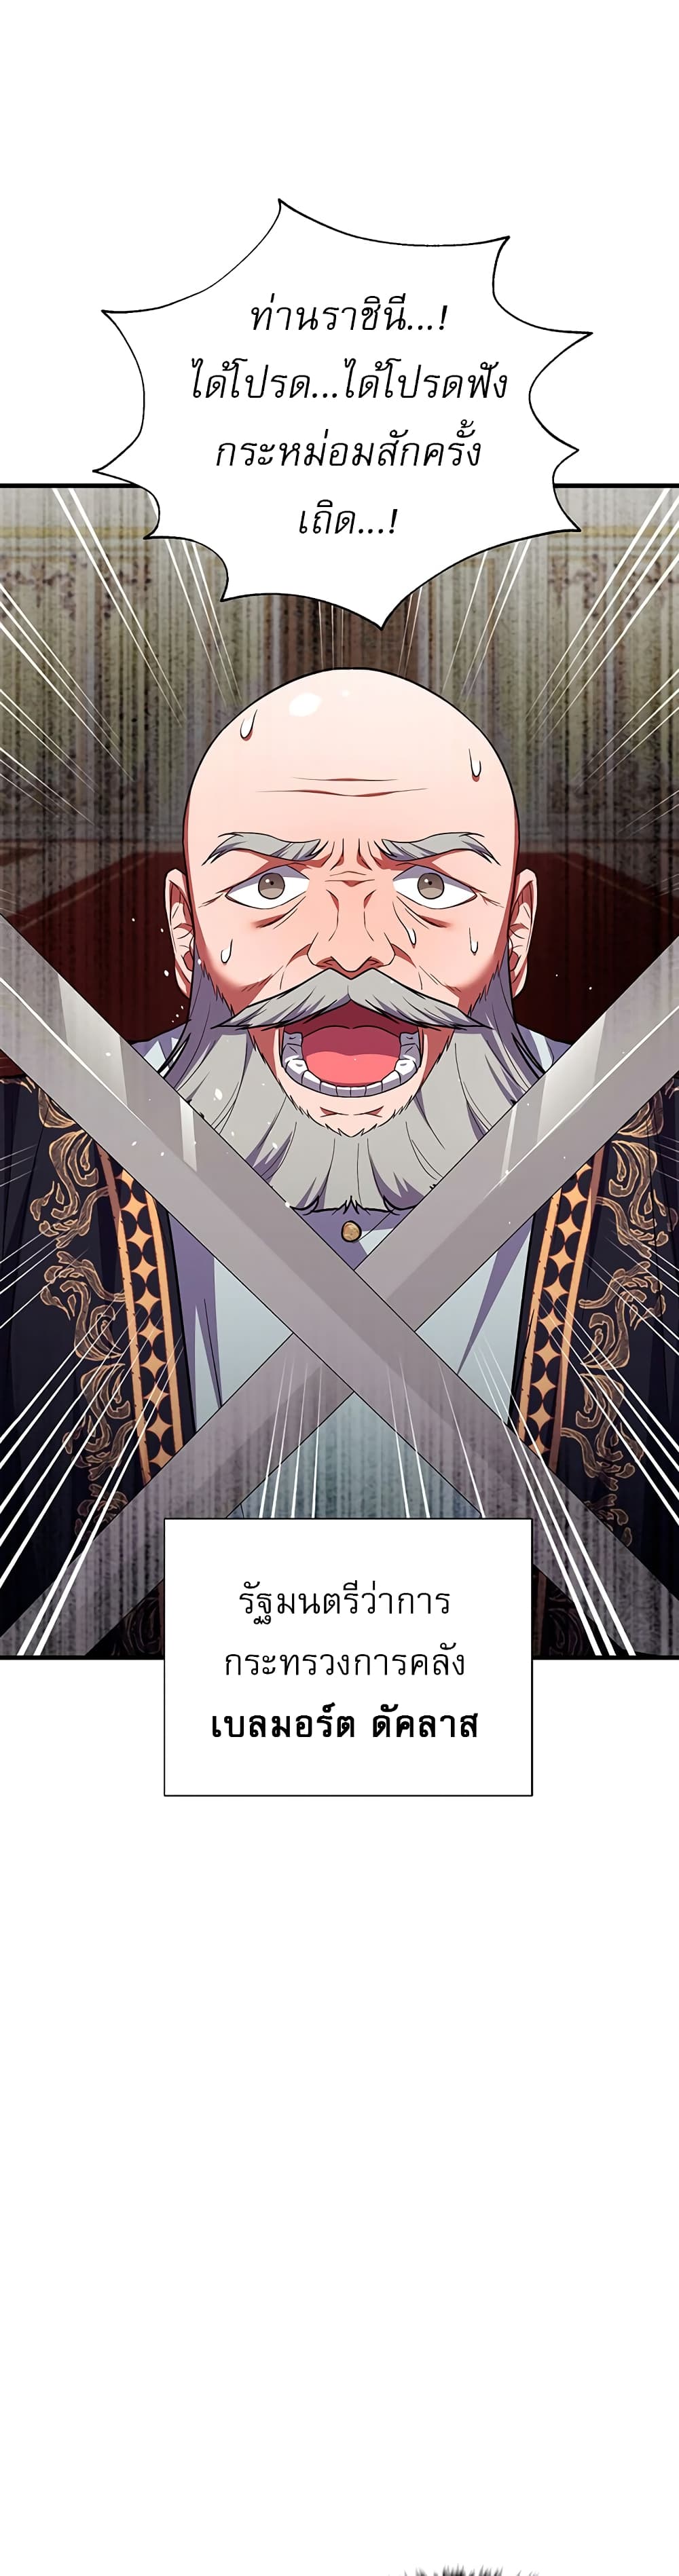 Taming an Evil Young Lady ตอนที่ 1 ภาพ 3